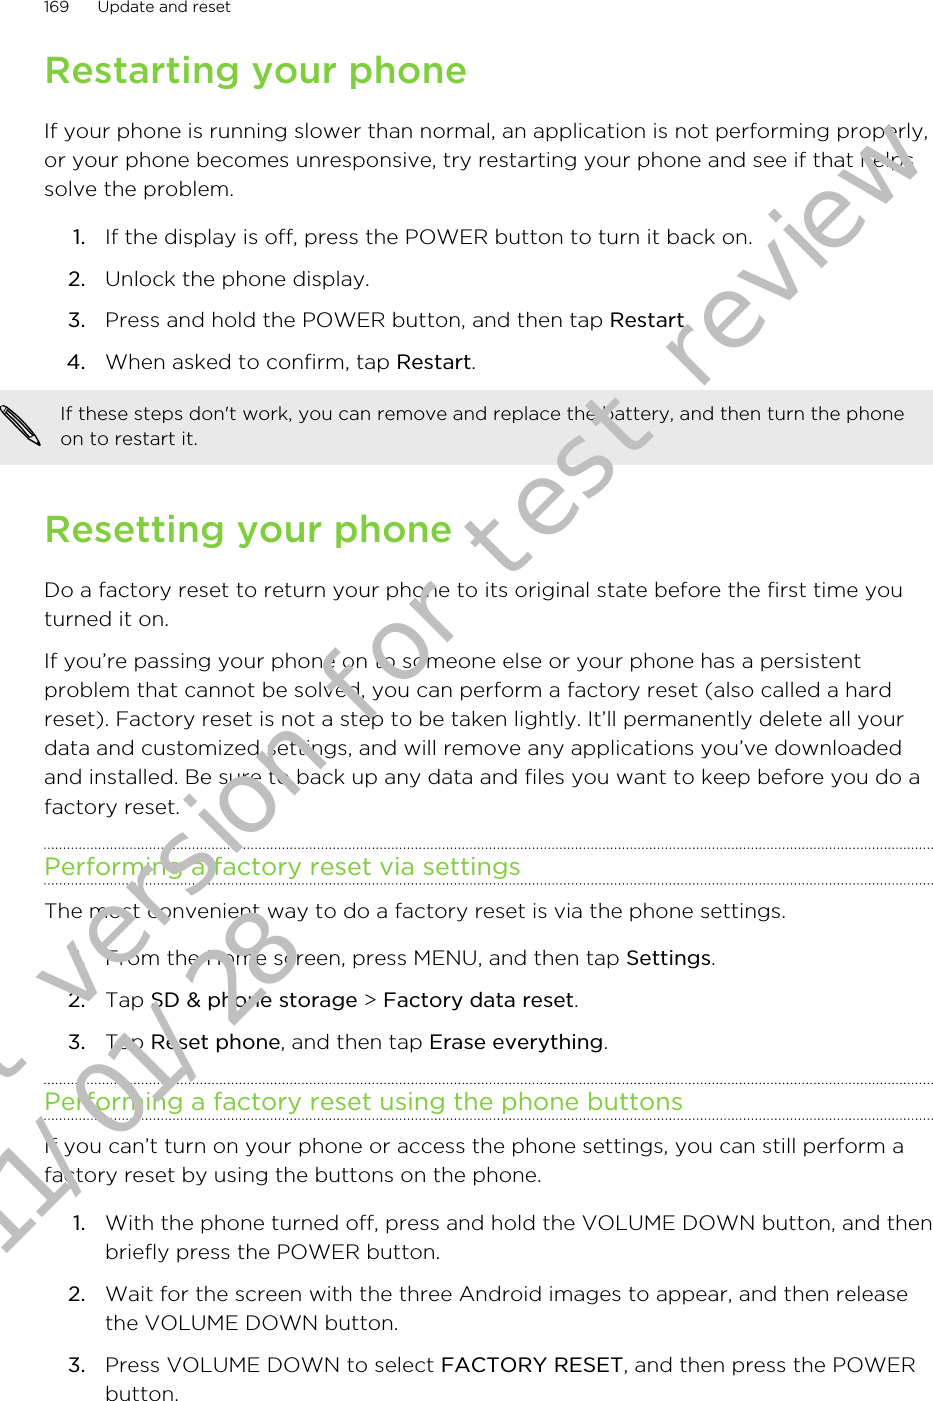 Restarting your phoneIf your phone is running slower than normal, an application is not performing properly,or your phone becomes unresponsive, try restarting your phone and see if that helpssolve the problem.1. If the display is off, press the POWER button to turn it back on.2. Unlock the phone display.3. Press and hold the POWER button, and then tap Restart.4. When asked to confirm, tap Restart.If these steps don&apos;t work, you can remove and replace the battery, and then turn the phoneon to restart it.Resetting your phoneDo a factory reset to return your phone to its original state before the first time youturned it on.If you’re passing your phone on to someone else or your phone has a persistentproblem that cannot be solved, you can perform a factory reset (also called a hardreset). Factory reset is not a step to be taken lightly. It’ll permanently delete all yourdata and customized settings, and will remove any applications you’ve downloadedand installed. Be sure to back up any data and files you want to keep before you do afactory reset.Performing a factory reset via settingsThe most convenient way to do a factory reset is via the phone settings.1. From the Home screen, press MENU, and then tap Settings.2. Tap SD &amp; phone storage &gt; Factory data reset.3. Tap Reset phone, and then tap Erase everything.Performing a factory reset using the phone buttonsIf you can’t turn on your phone or access the phone settings, you can still perform afactory reset by using the buttons on the phone.1. With the phone turned off, press and hold the VOLUME DOWN button, and thenbriefly press the POWER button.2. Wait for the screen with the three Android images to appear, and then releasethe VOLUME DOWN button.3. Press VOLUME DOWN to select FACTORY RESET, and then press the POWERbutton.169 Update and resetDraft version for test review 2011/01/28 